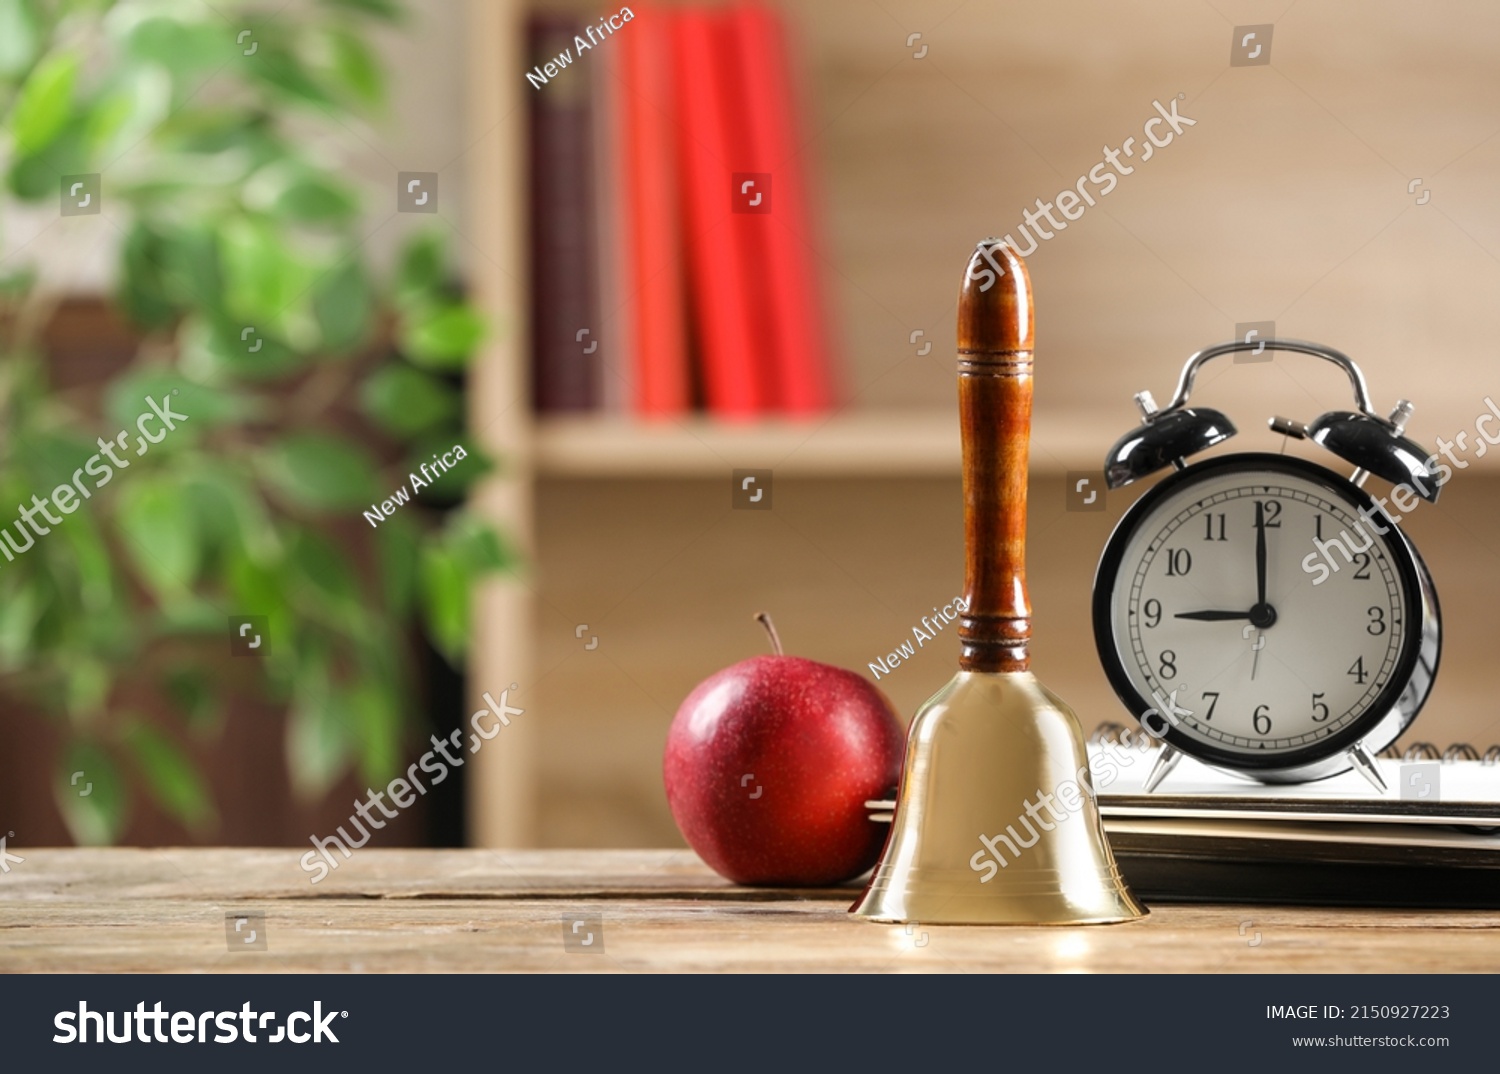 Golden school bell, apple, alarm clock and notebooks on wooden table in classroom, space for text #2150927223